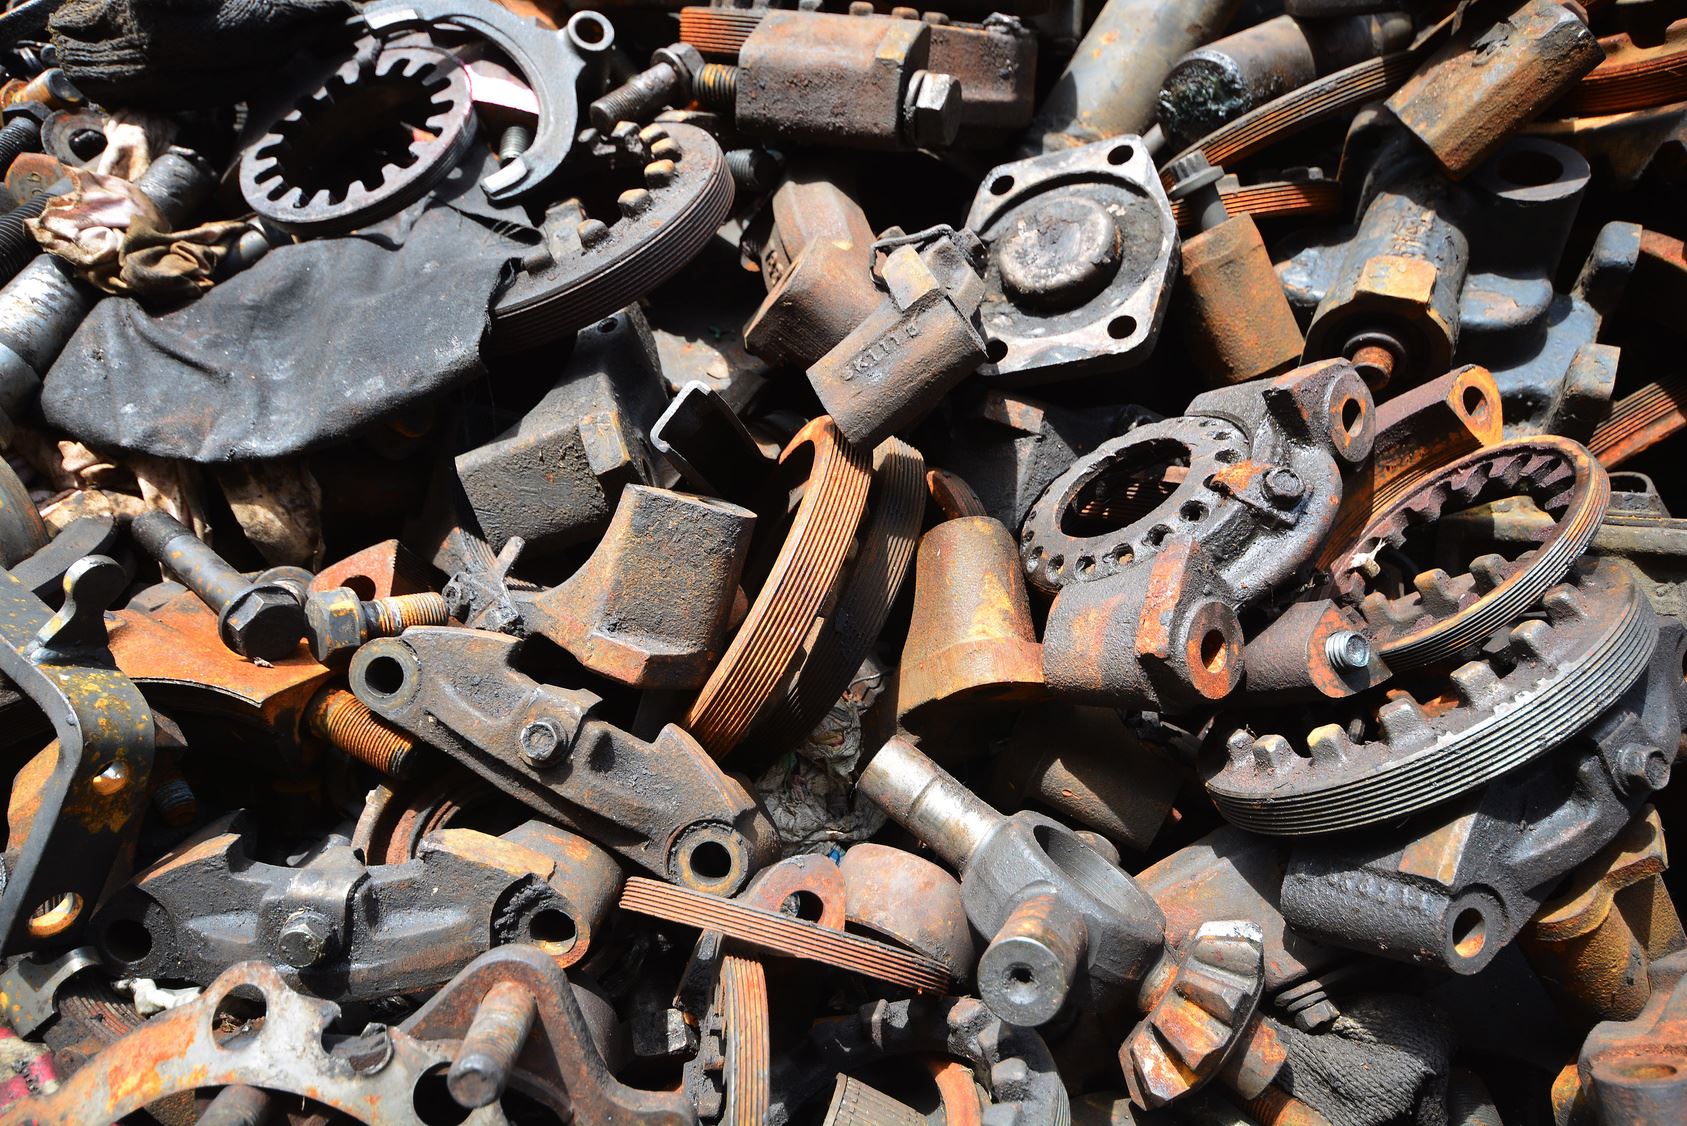 Shagang Steel's ferrous scrap purchase prices increased